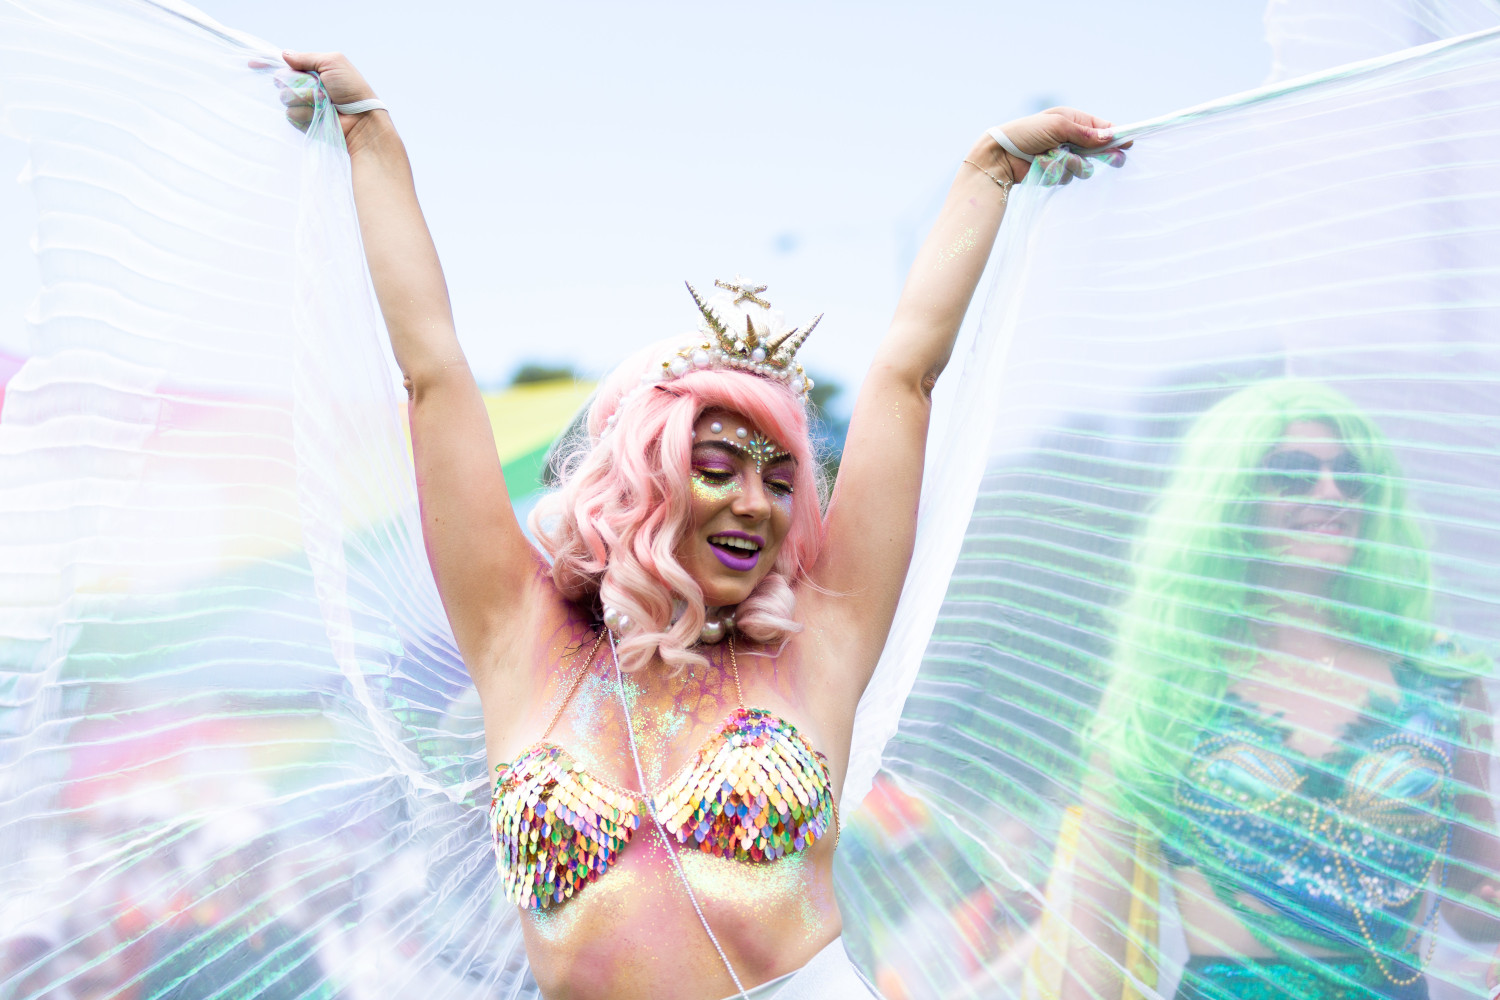 Person in a pink wig, wearing a crown, arms in air looking very happy - gossamer angel wings behind them